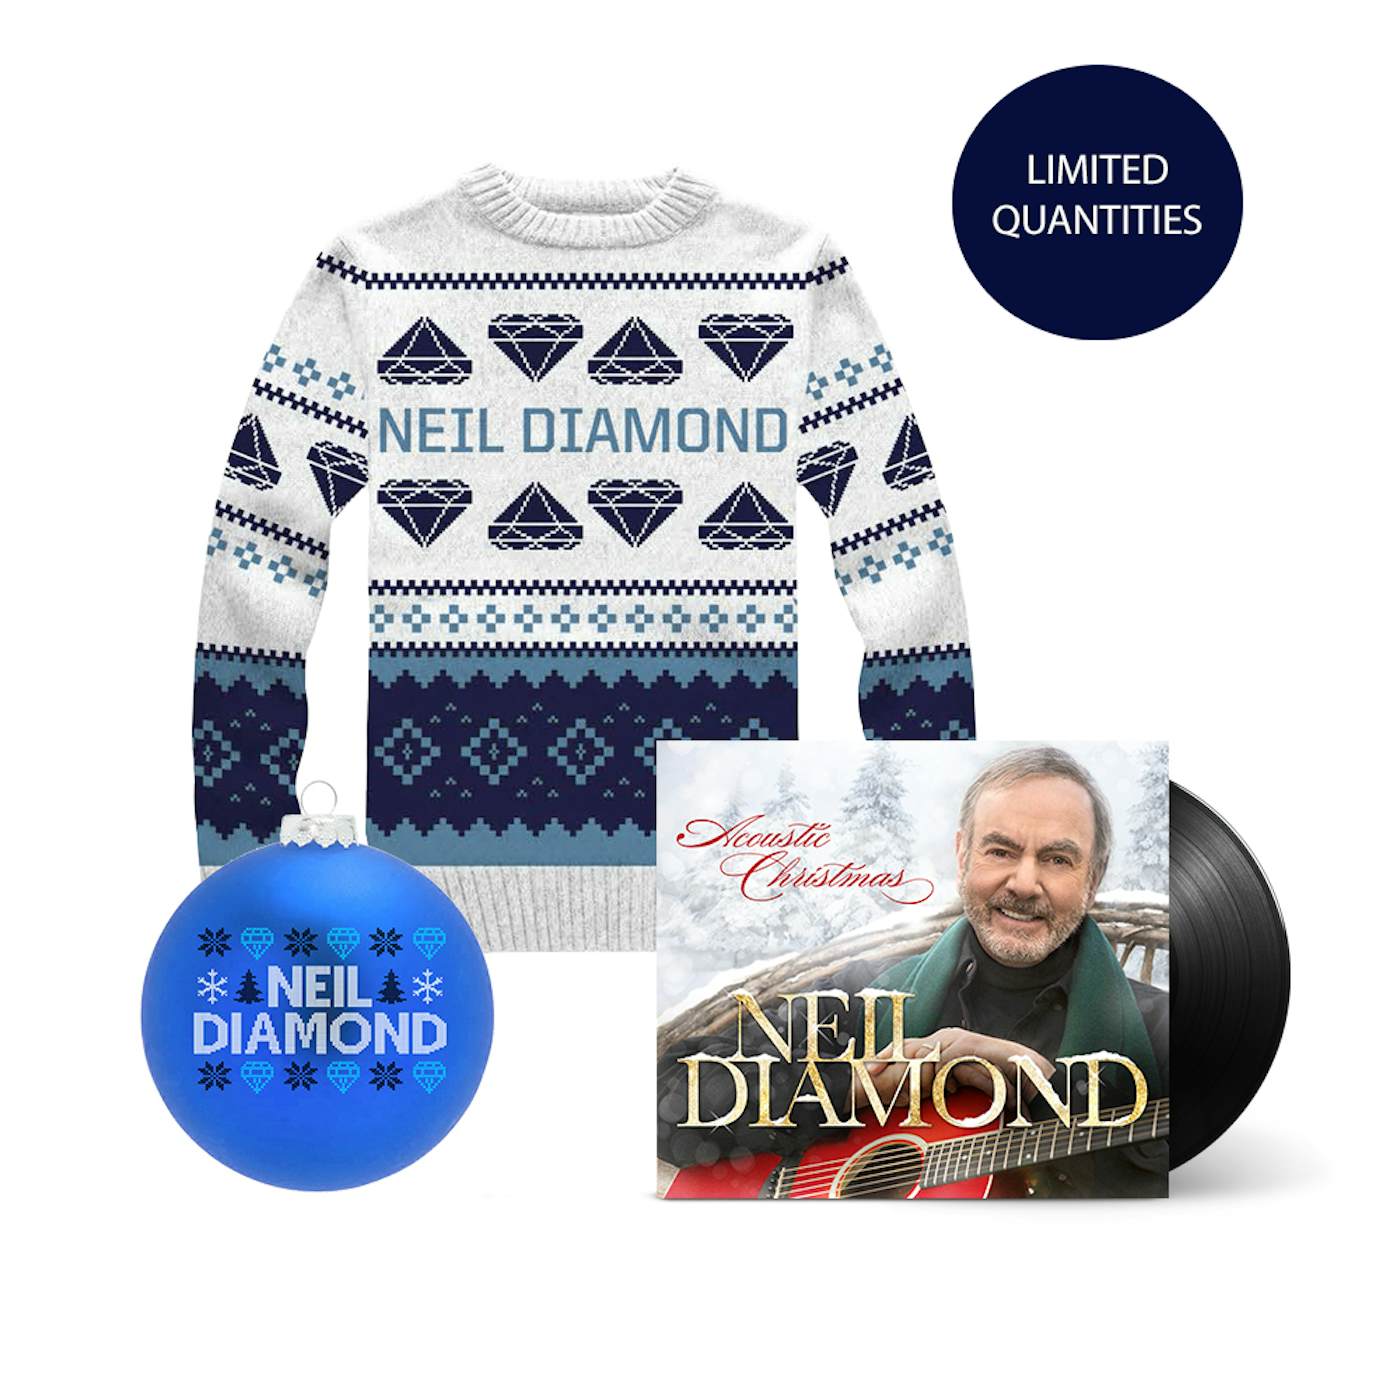 Neil Diamond Acoustic Christmas LP + Holiday Knit Sweater + Holiday Ornament